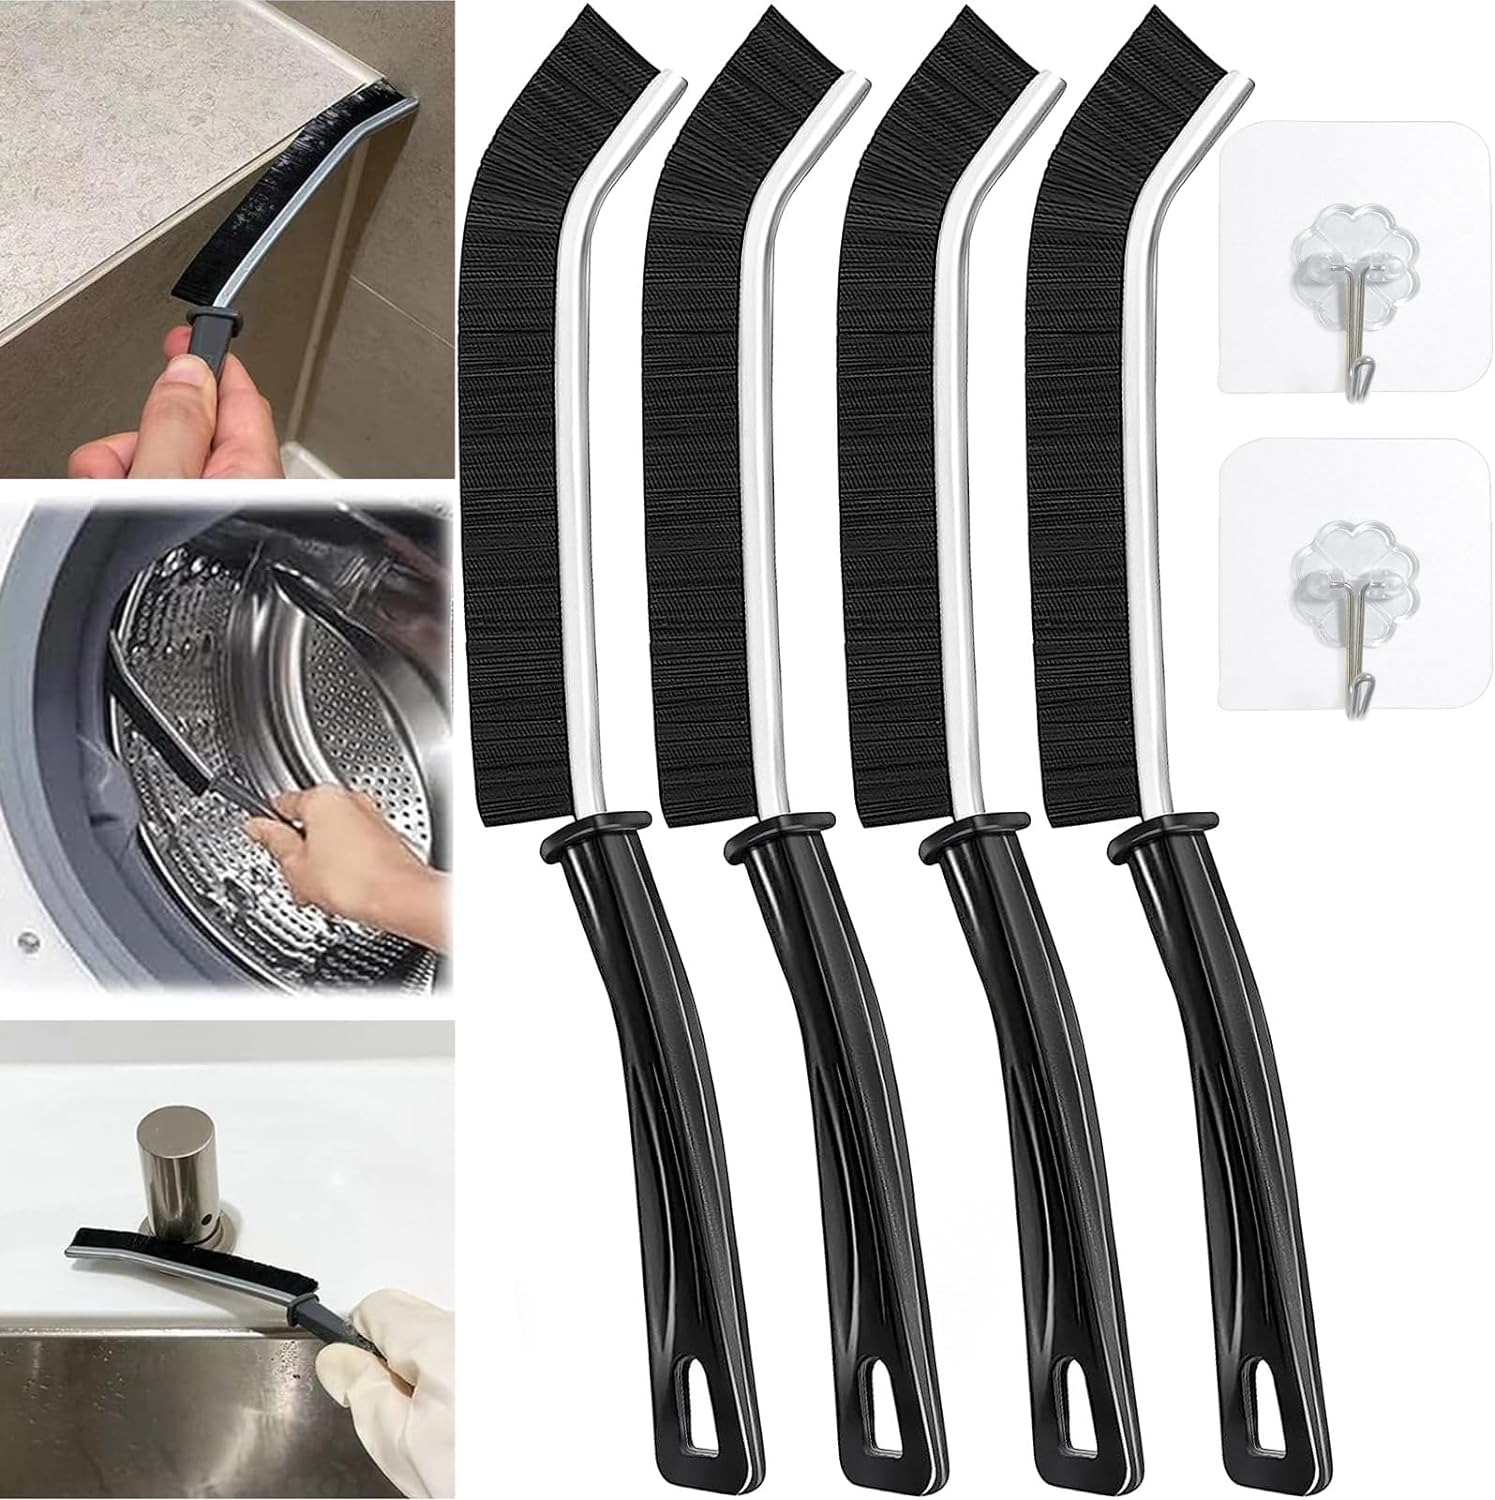 4 Pcs Hard Bristle Crevice Cleaning Brush, Multifunctional Gap Cleaning Brushes, Crevice Cleaning Tool, Groove Grout Cleaner Brush, Small Cleaning Brush for Shutter Door Window Track Kitchen.